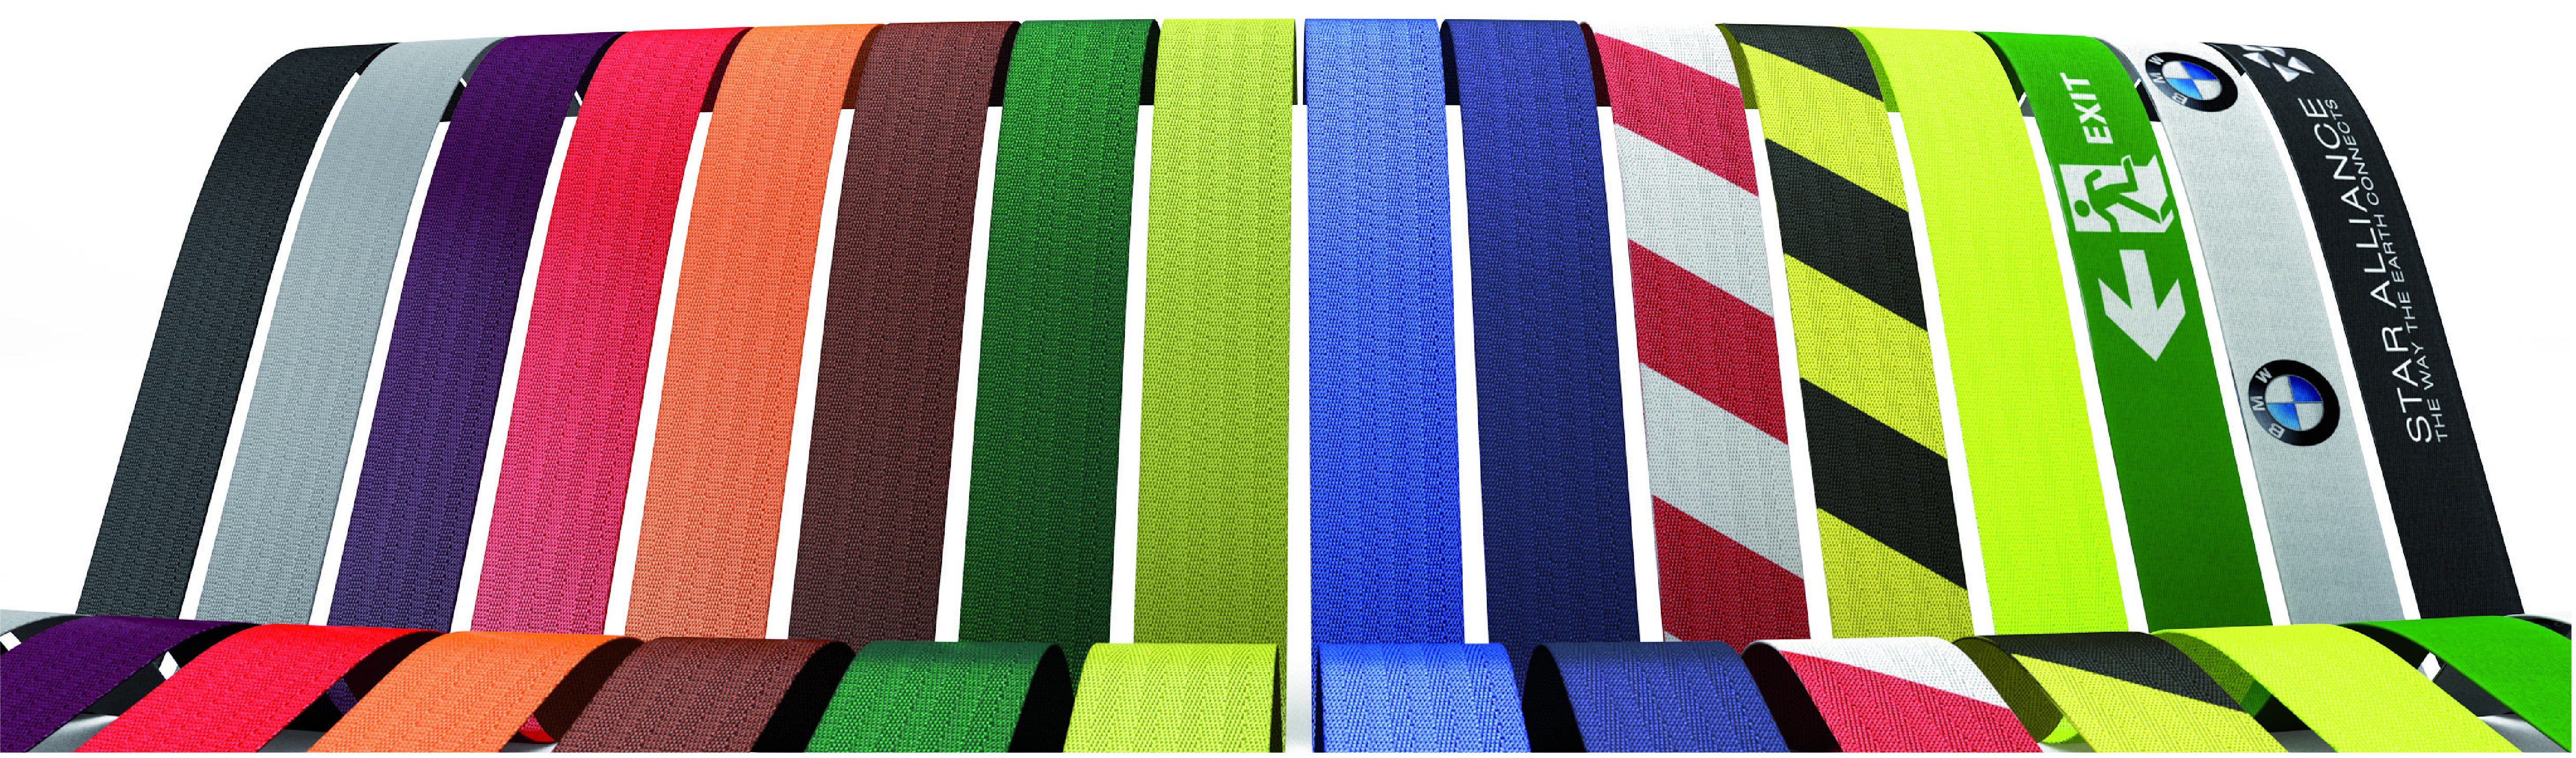 Examples of belt colours and belt printing